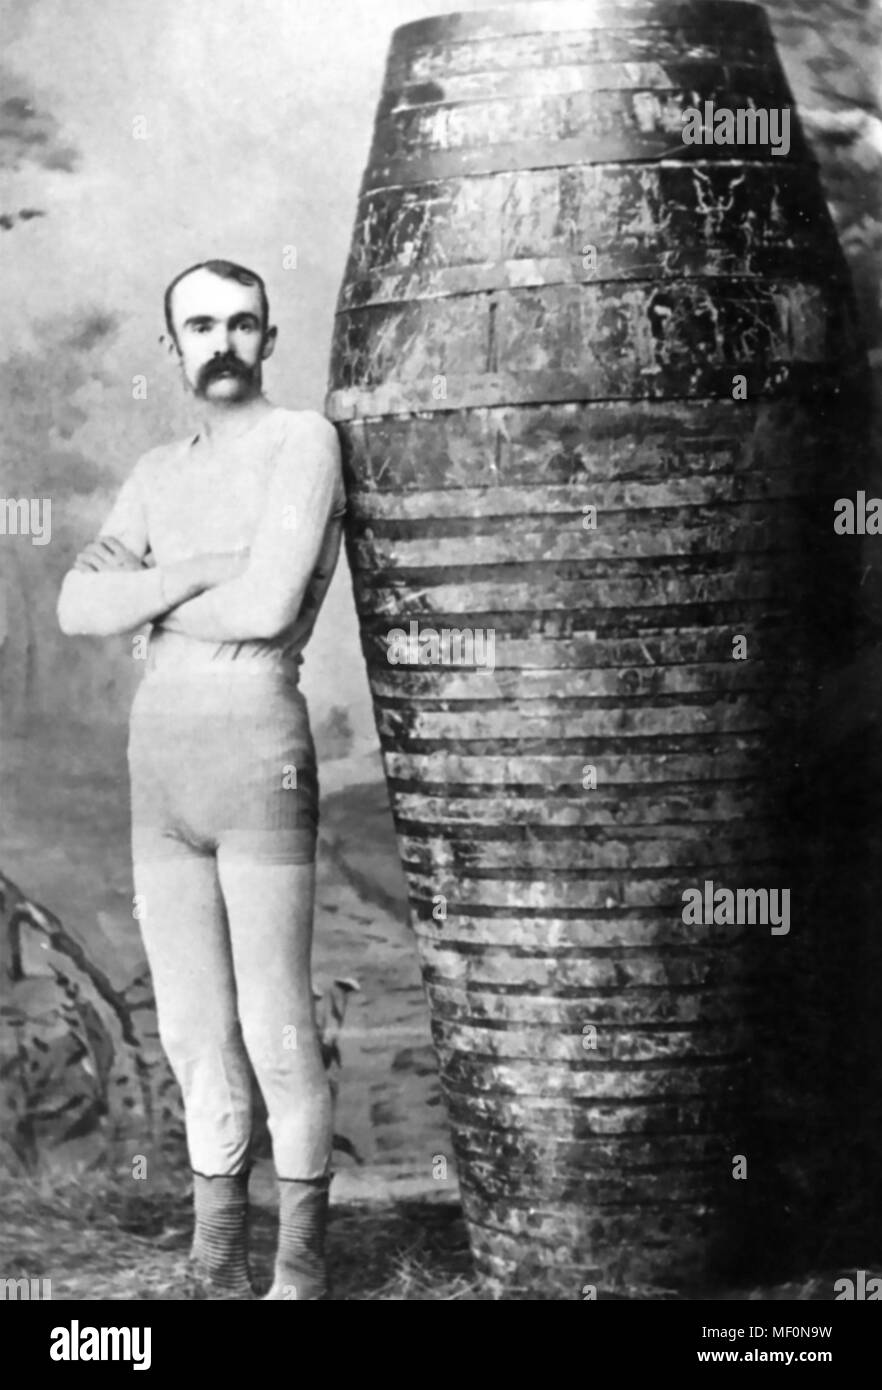 CARLISLE GRAHAM A Philadelphia barrel maker who was the first person to survive a trip over the Niagara Falls in  barrel on 11 July 1886. Stock Photo